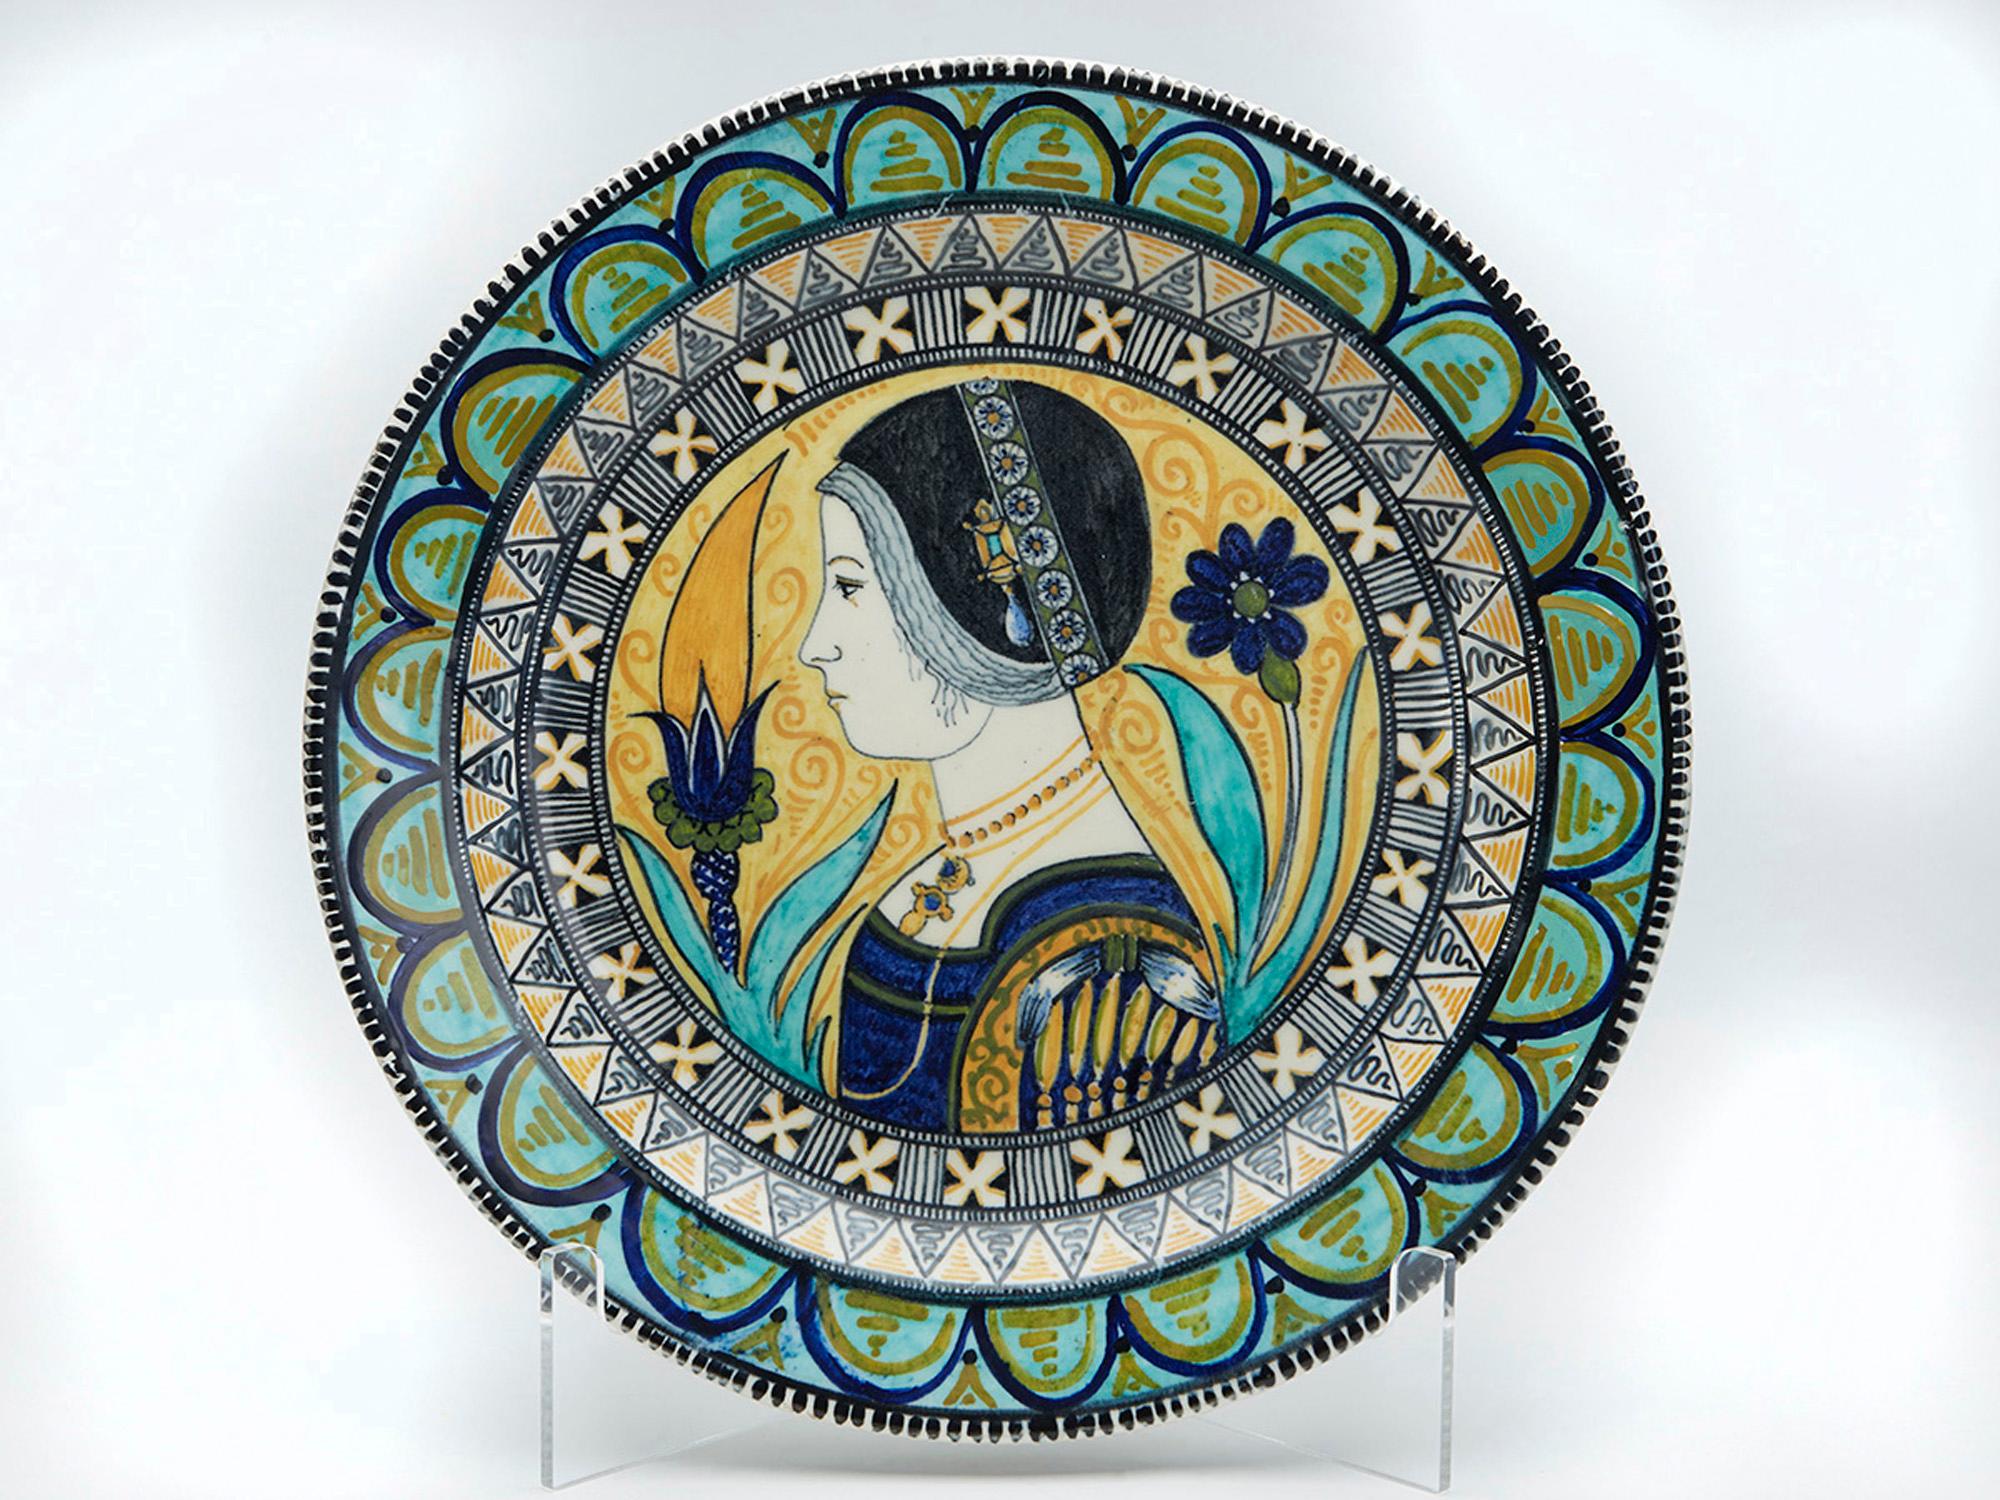 An exceptional Italian Renaissance revival maiolica tin-glazed charger painted with a side profile portrait of a lady manufactured in Rome by Torquato Castellani and dated 1881.

Maiolica (or majolica) is a term traditionally applied to a type of